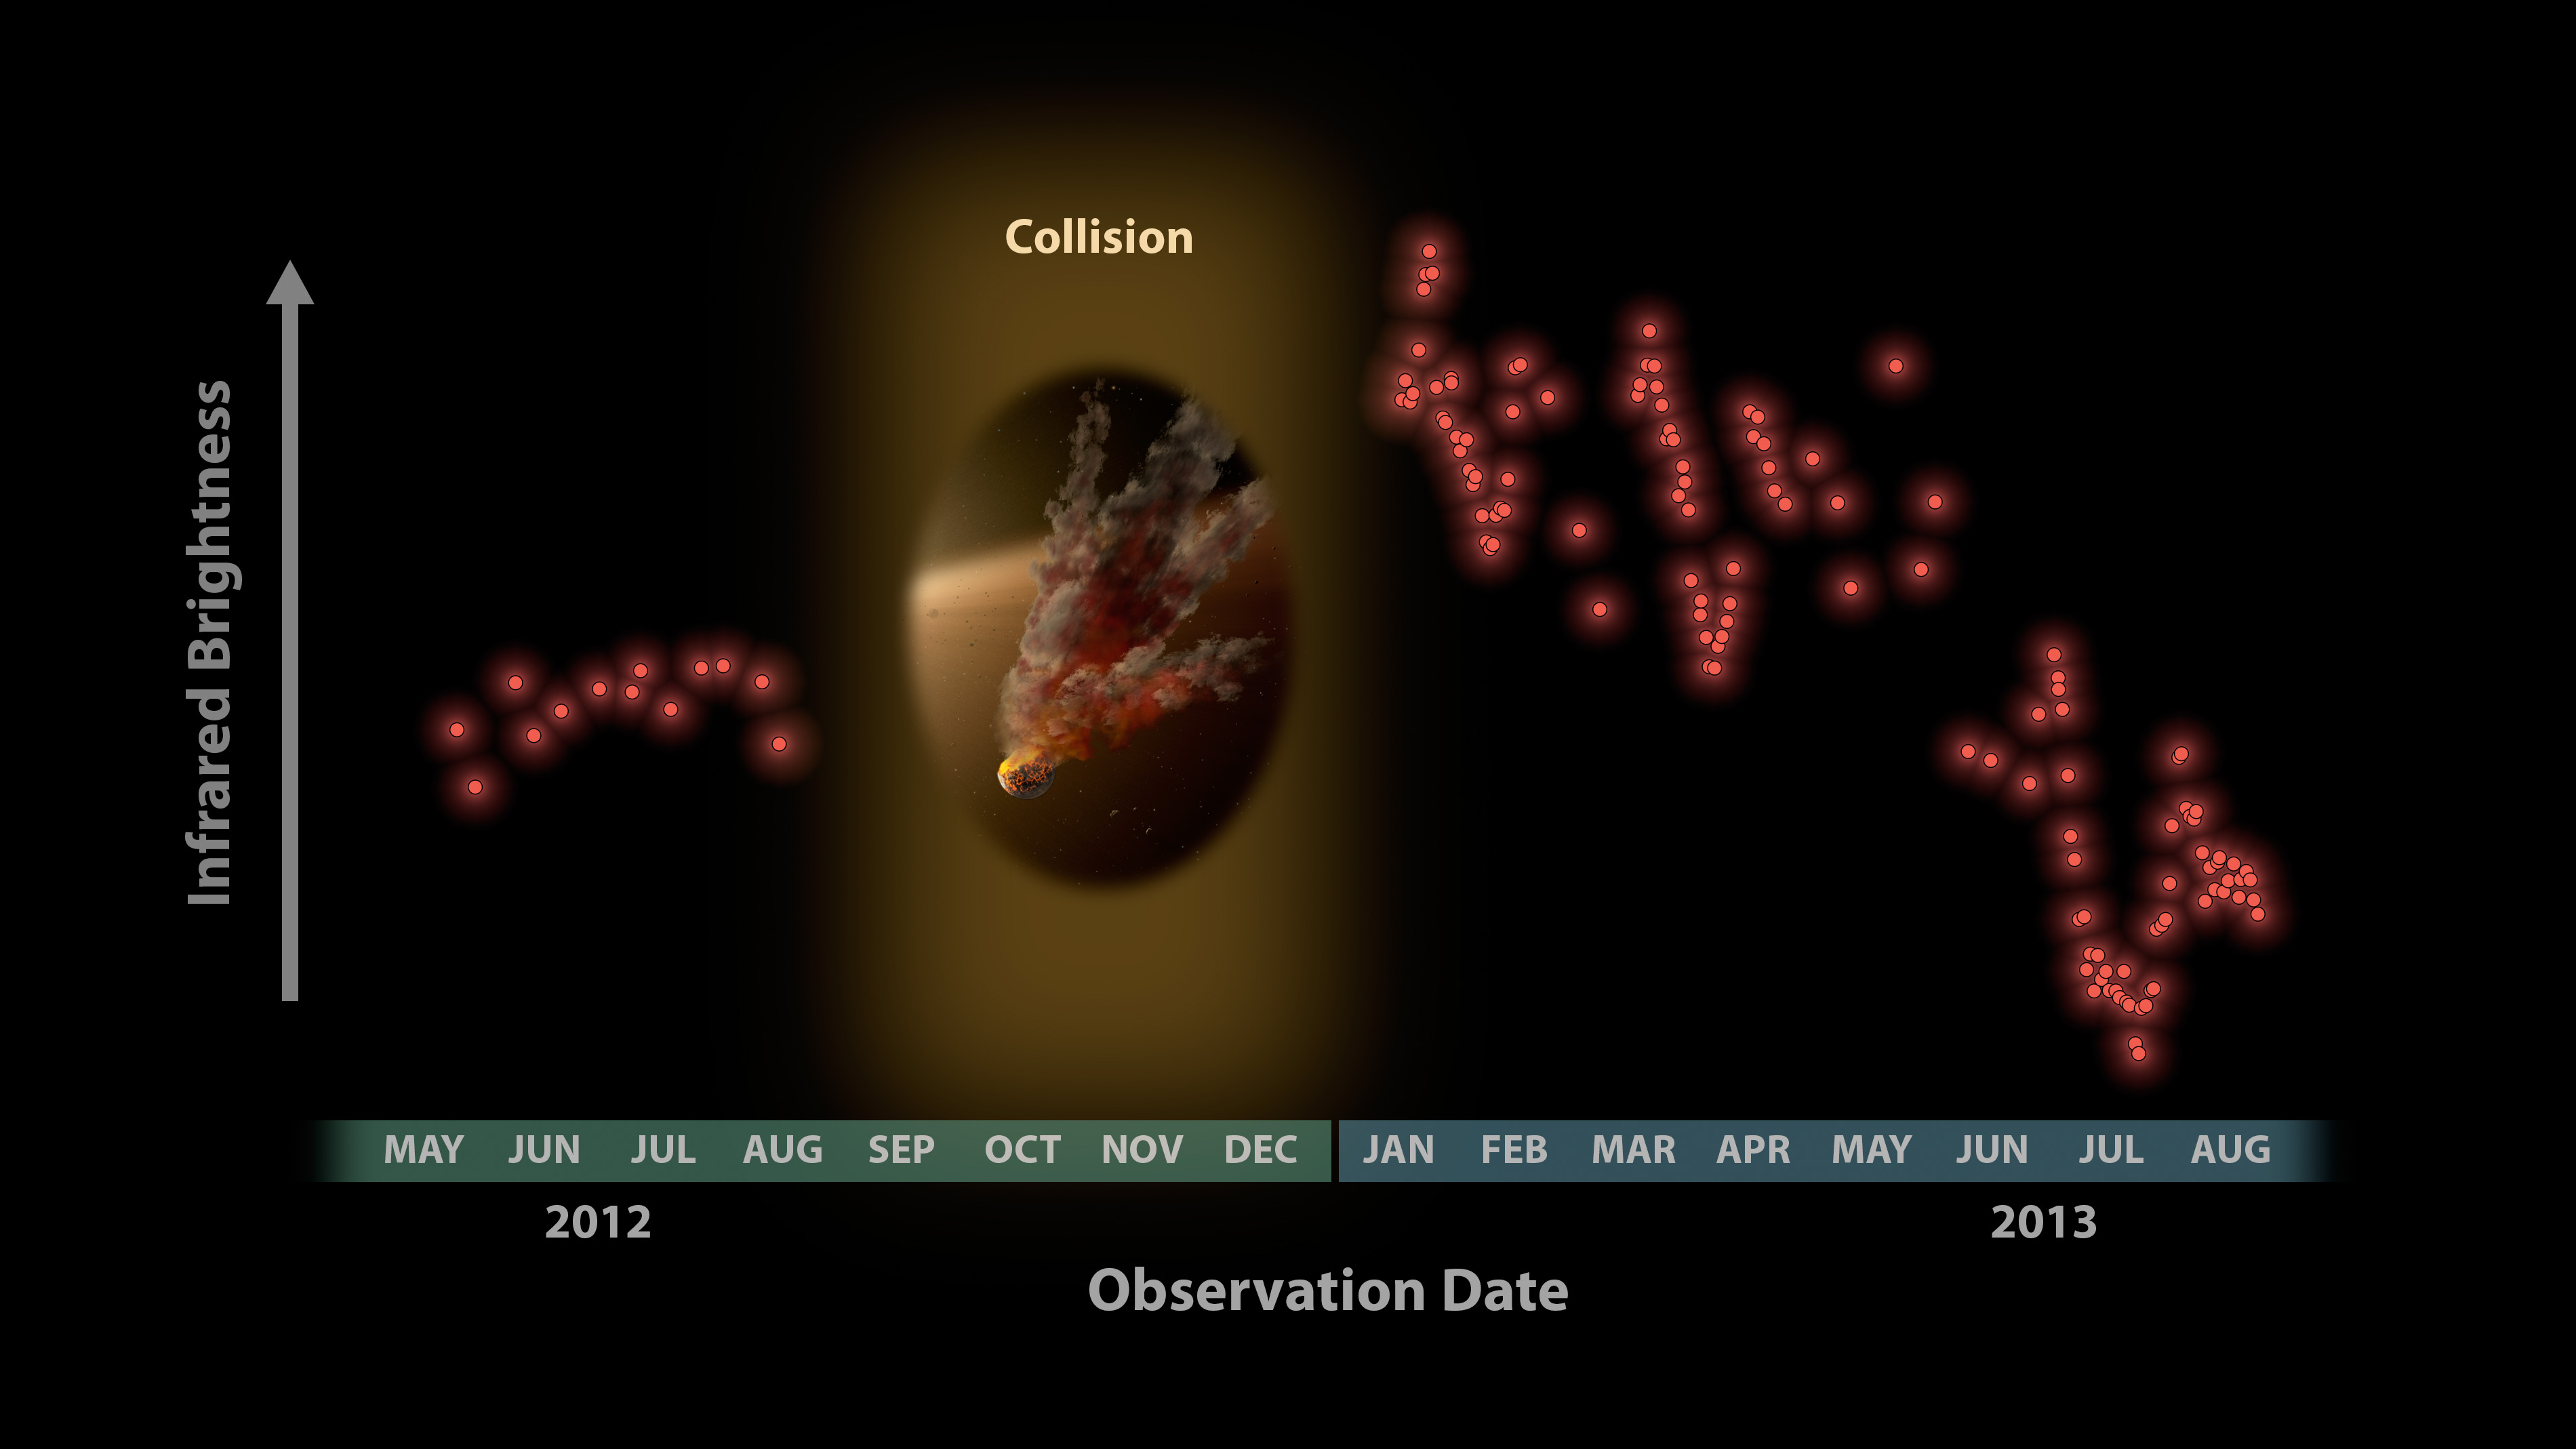 Figure 4:Witnessing a Planetary Wreckage: Astronomers were surprised to see these data from NASA's Spitzer Space Telescope in January 2013, showing a huge eruption of dust around a star called NGC 2547-ID8. In this plot, infrared brightness is represented on the vertical axis, and time on the horizontal axis. The data at left show infrared light from the dust around the star back in 2012. Between 2012 and 2013, Spitzer had to stop observing the star because it was located behind the sun, as seen from Spitzer's Earth-trailing orbit.
When Spitzer began watching the star again in January 2013, the astronomers noticed a huge jump in the data. Why the dramatic change? The team says that dust in the star system surged intensely, likely after two large asteroids collided, kicking up fresh dust.
The periodic variability of the signal is caused by the remaining dust cloud in orbit around the star. This dust cloud is elongated, so the amount of infrared signal it produces changes as it circles the star from our point of view. The infrared signal is decreasing over time as dust from the collision is ground down to finer sizes and blown of the system. 
Image credit: NASA/JPL-Caltech/University of Arizona 